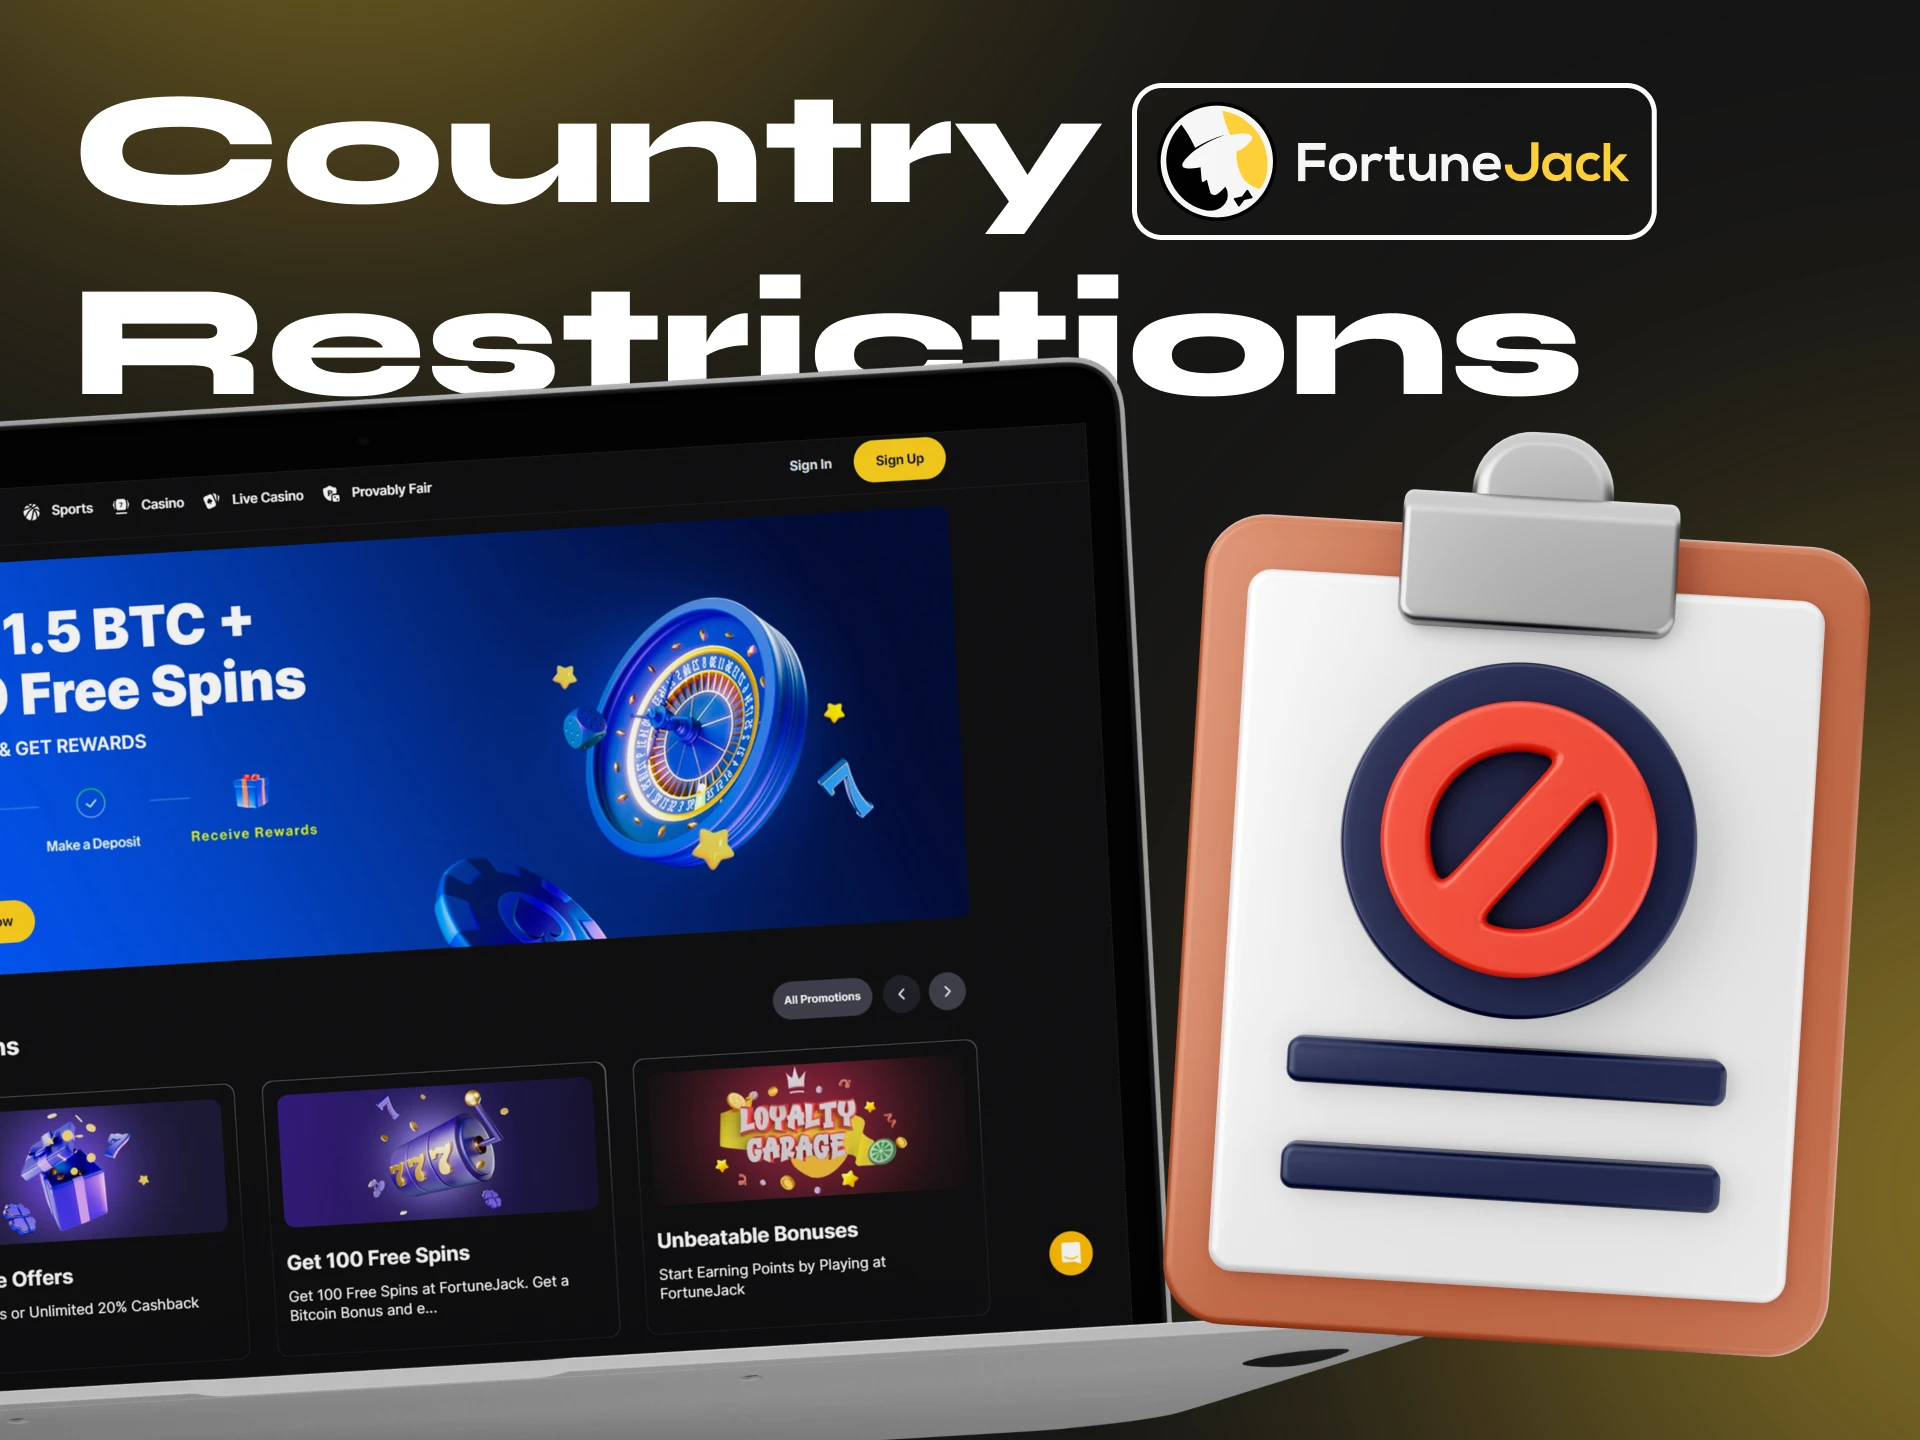 Here is a list of countries where FortuneJack Casino is not available.